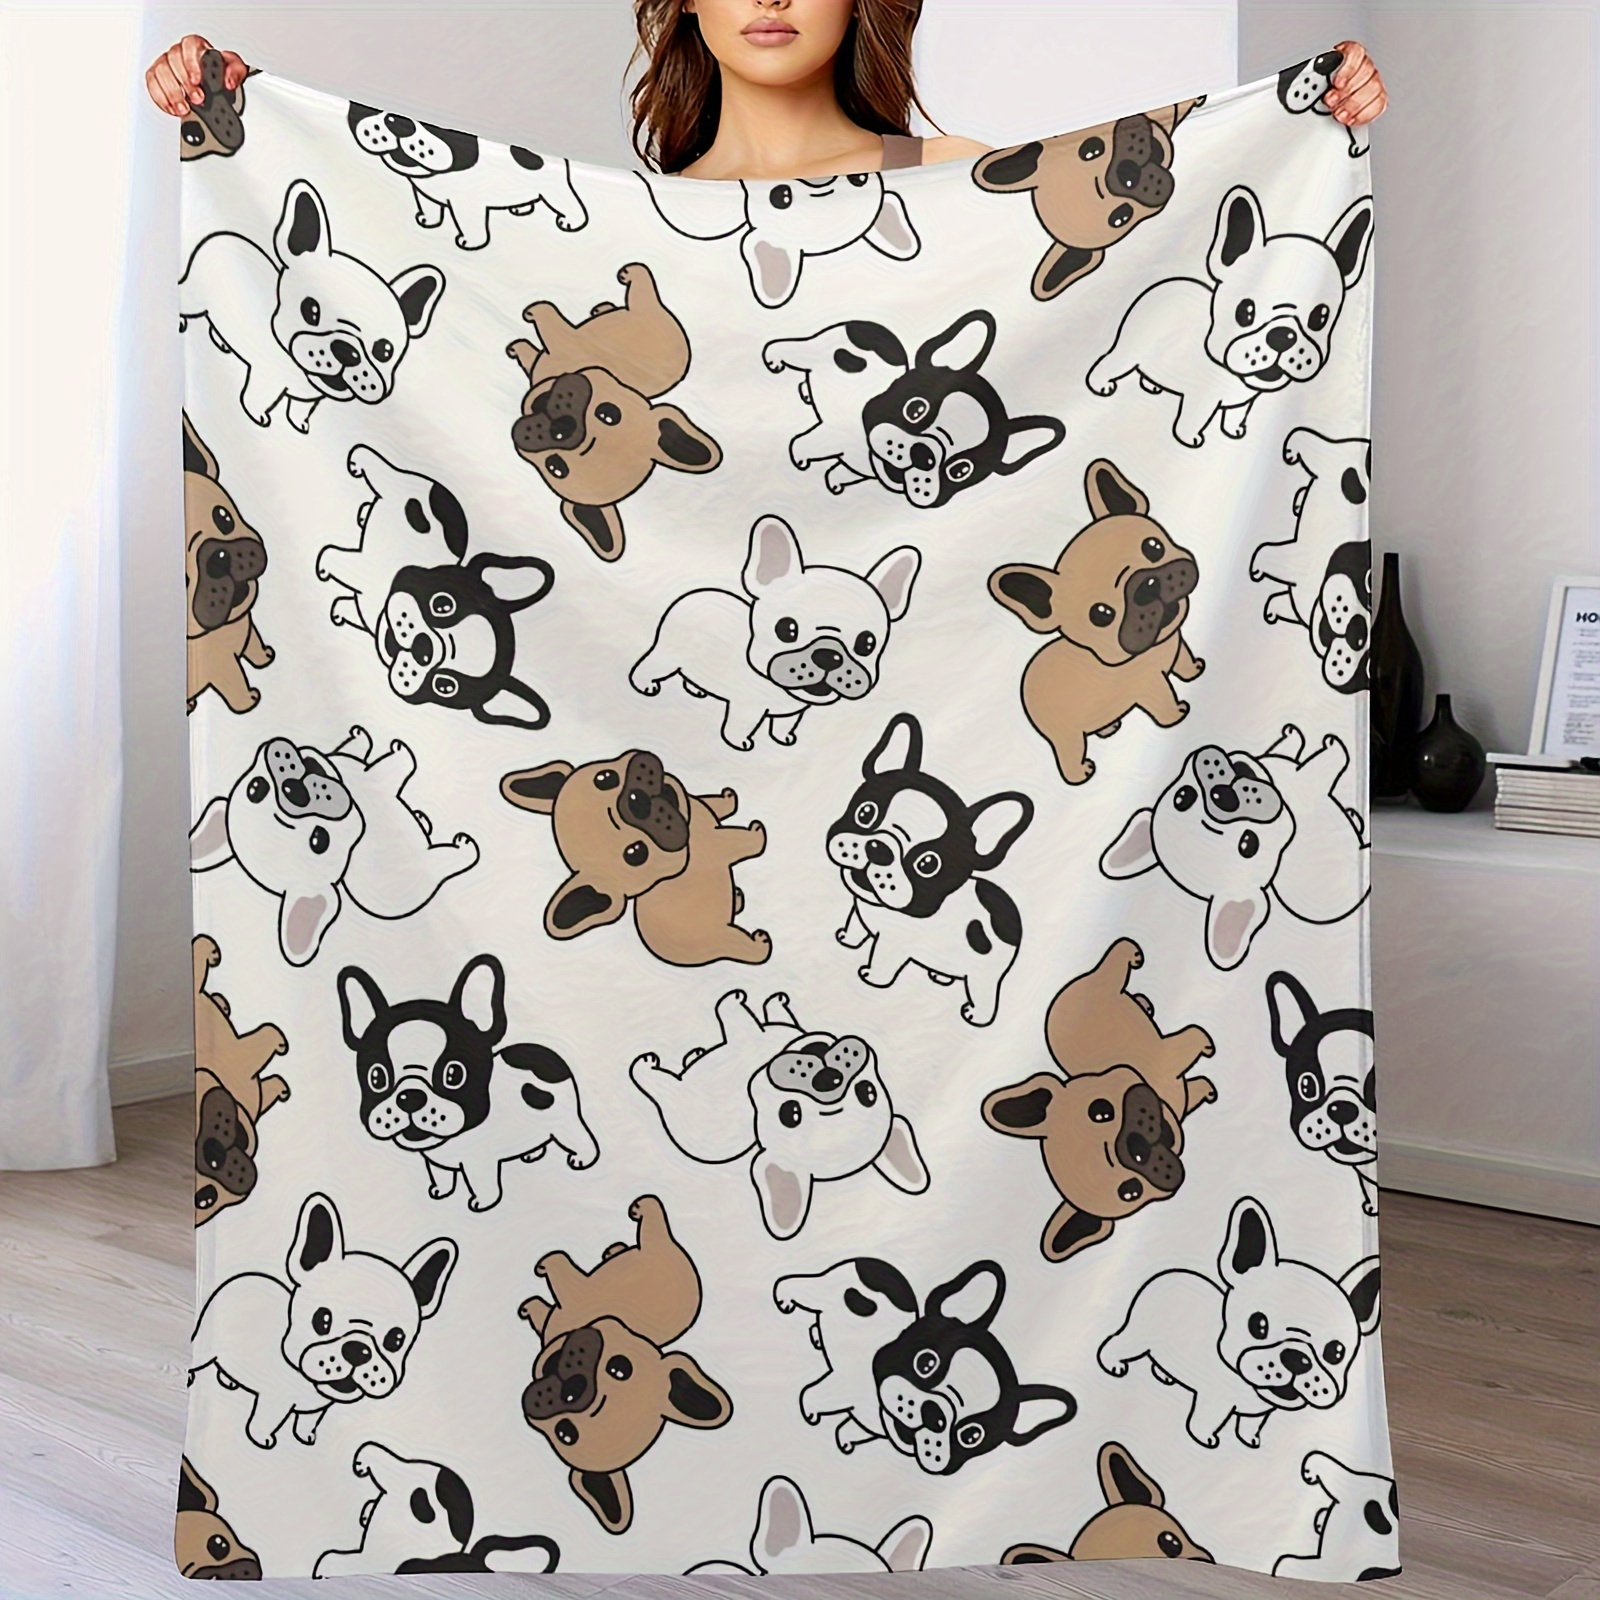 

Cozy French Bulldog Flannel Throw Blanket - Soft, Warm & Tear-resistant For Couch, Bed, Office, And Travel - All-season Gift Idea